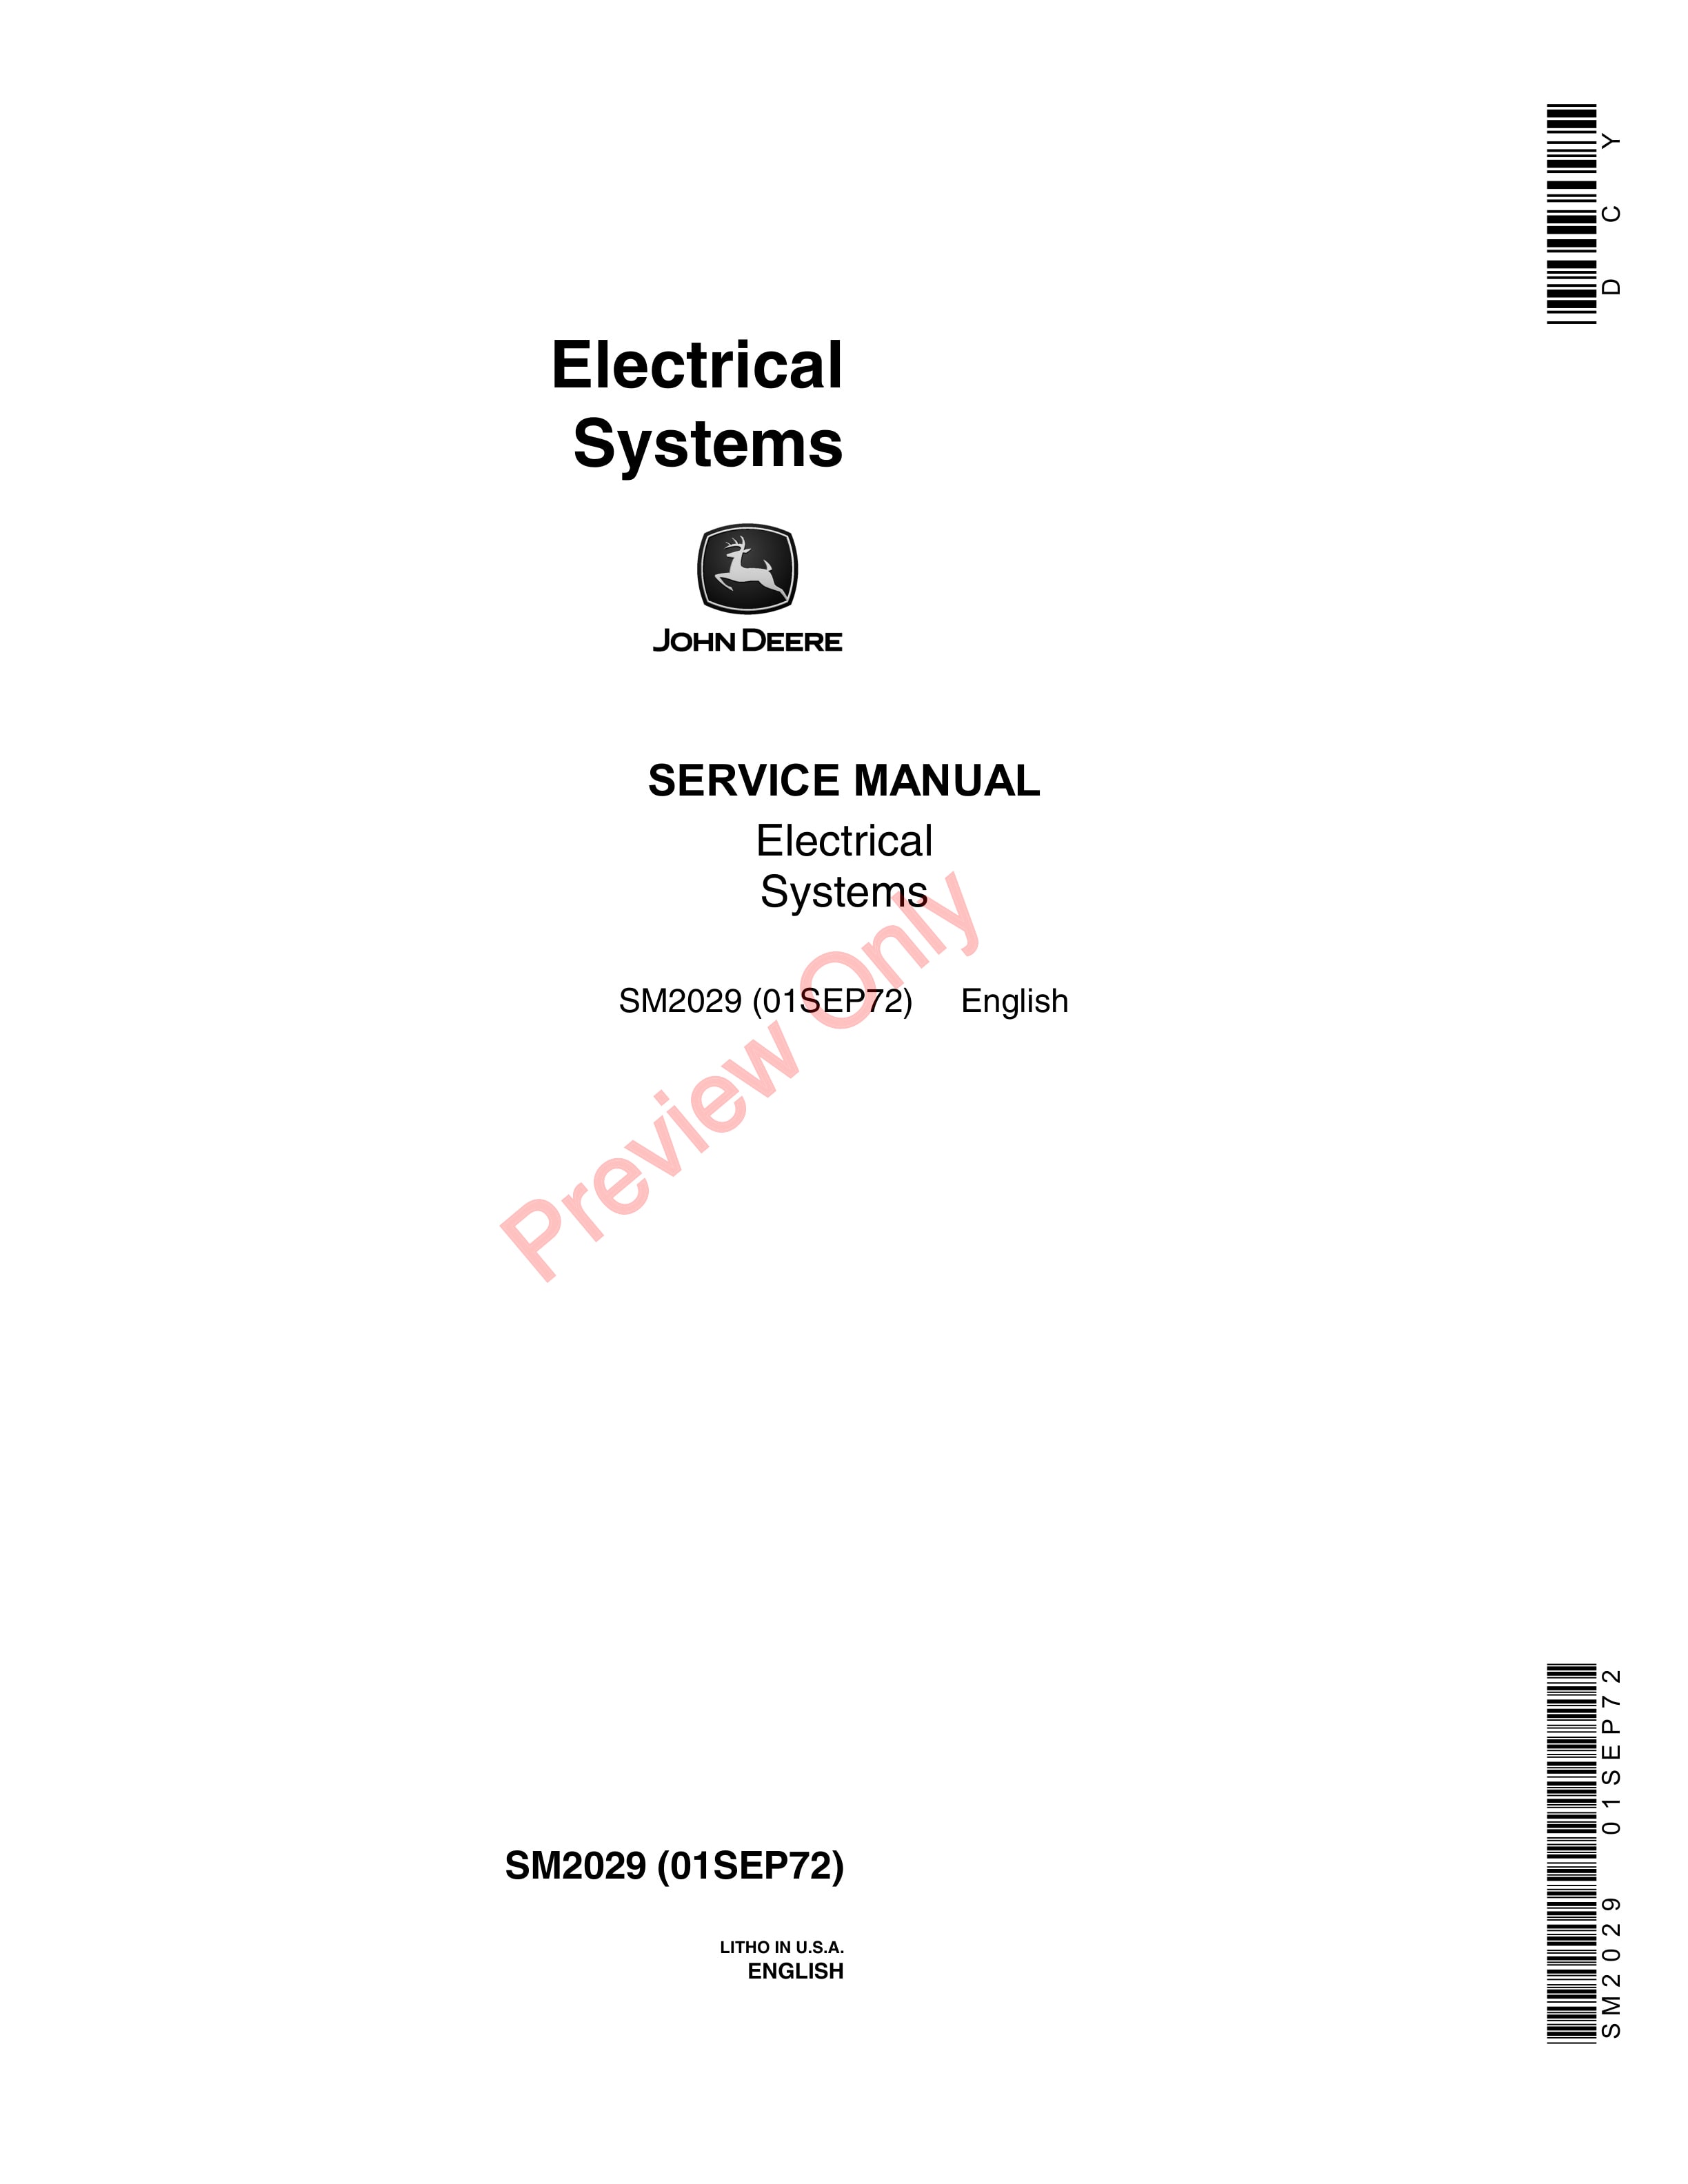 John Deere Accessories and Electrical Systems For Older Tractors Service Manual SM2029 01SEP72-1